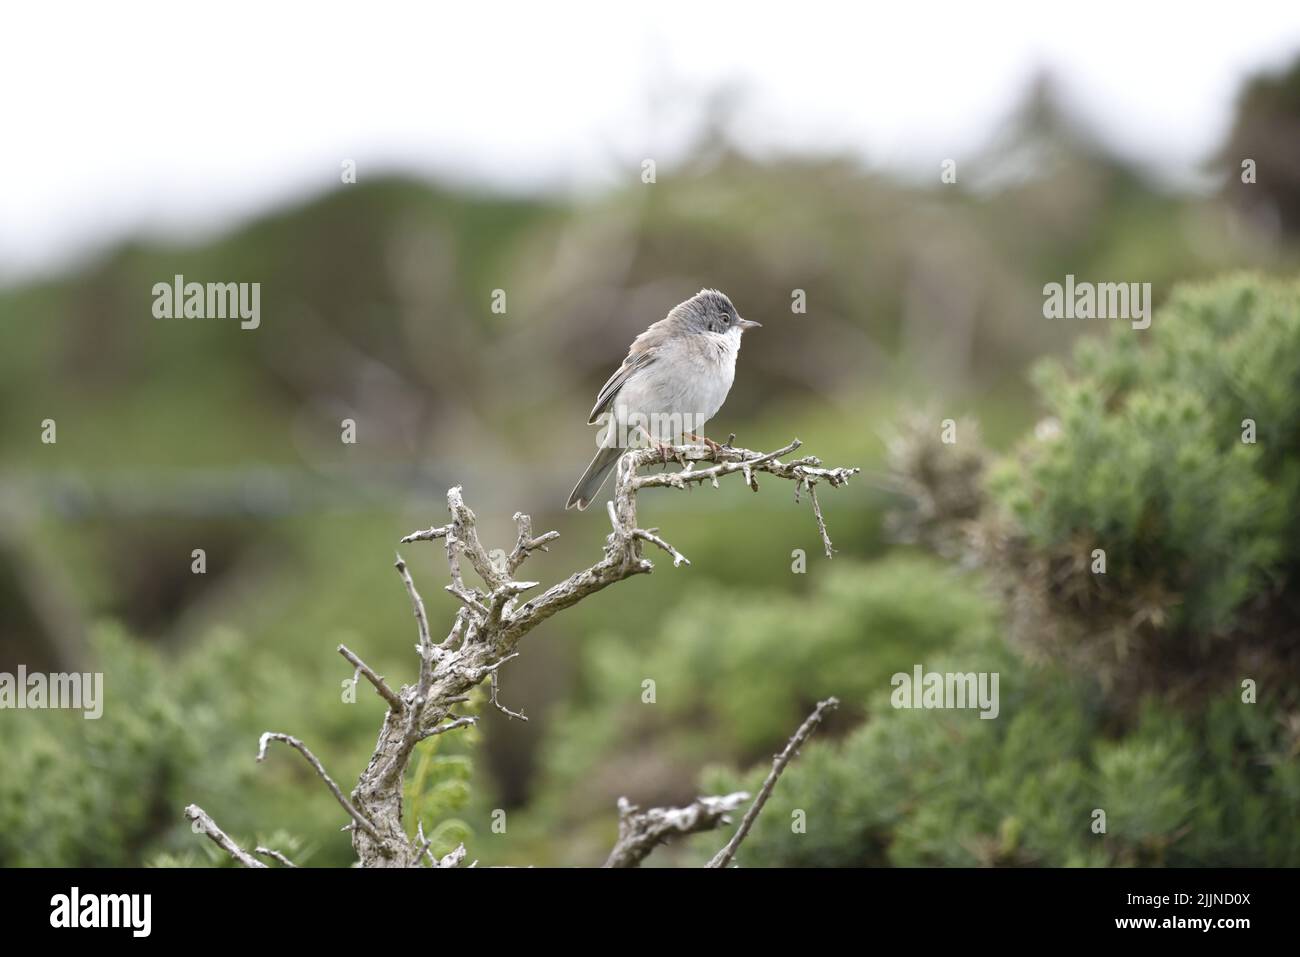 Foreground Image of a Common Whitethroat (Slyvia communis) Gripping Onto a Bare Branch, in Right-Profile, Looking to Right of Image in the UK, June Stock Photo